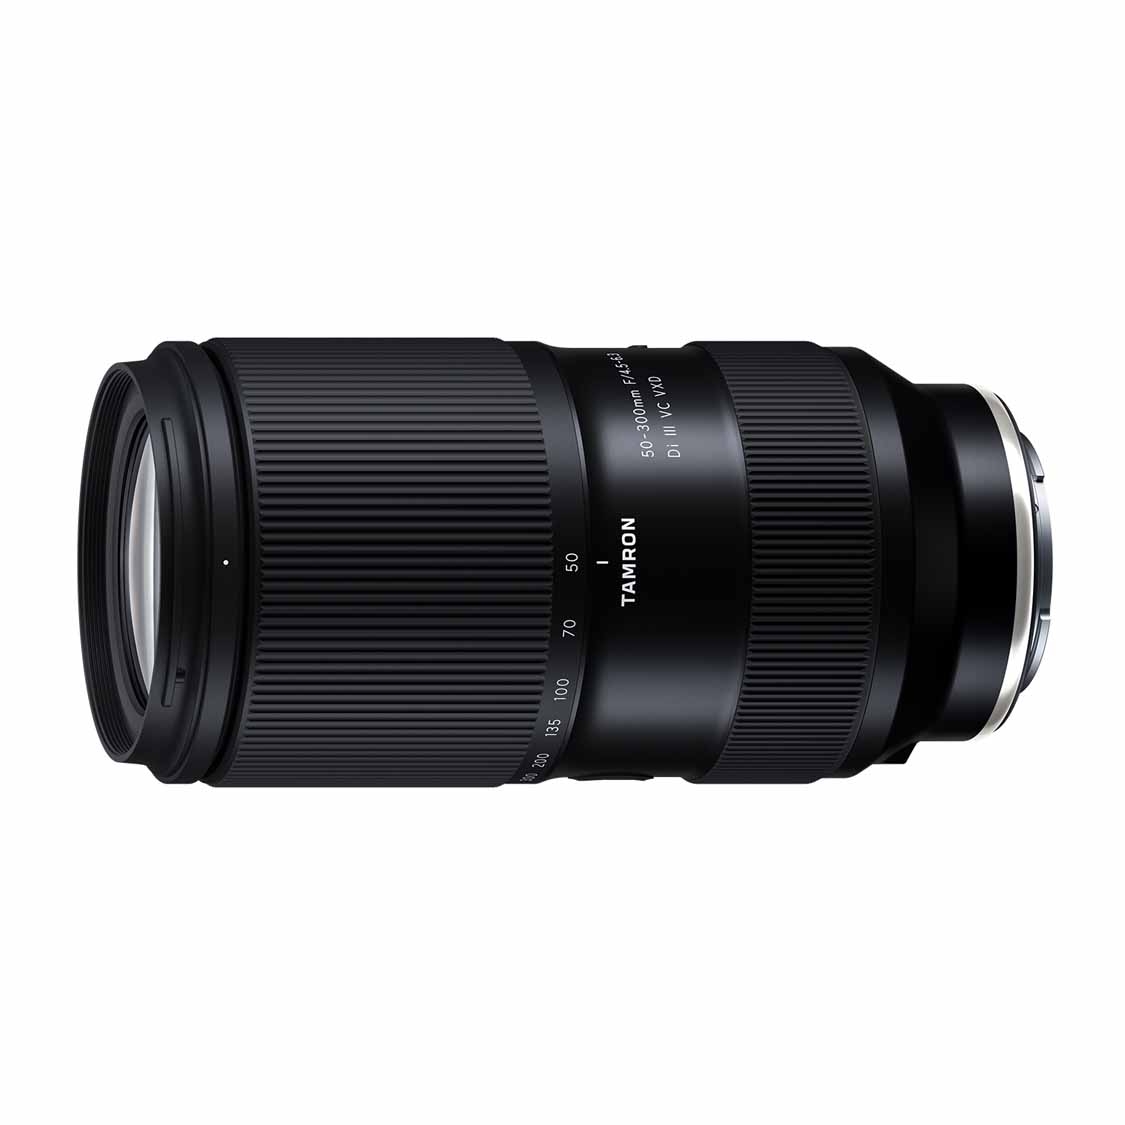 Tamron 50-300mm F4.5-6.3 DI III VC VXD Lens for Sony E-Mount